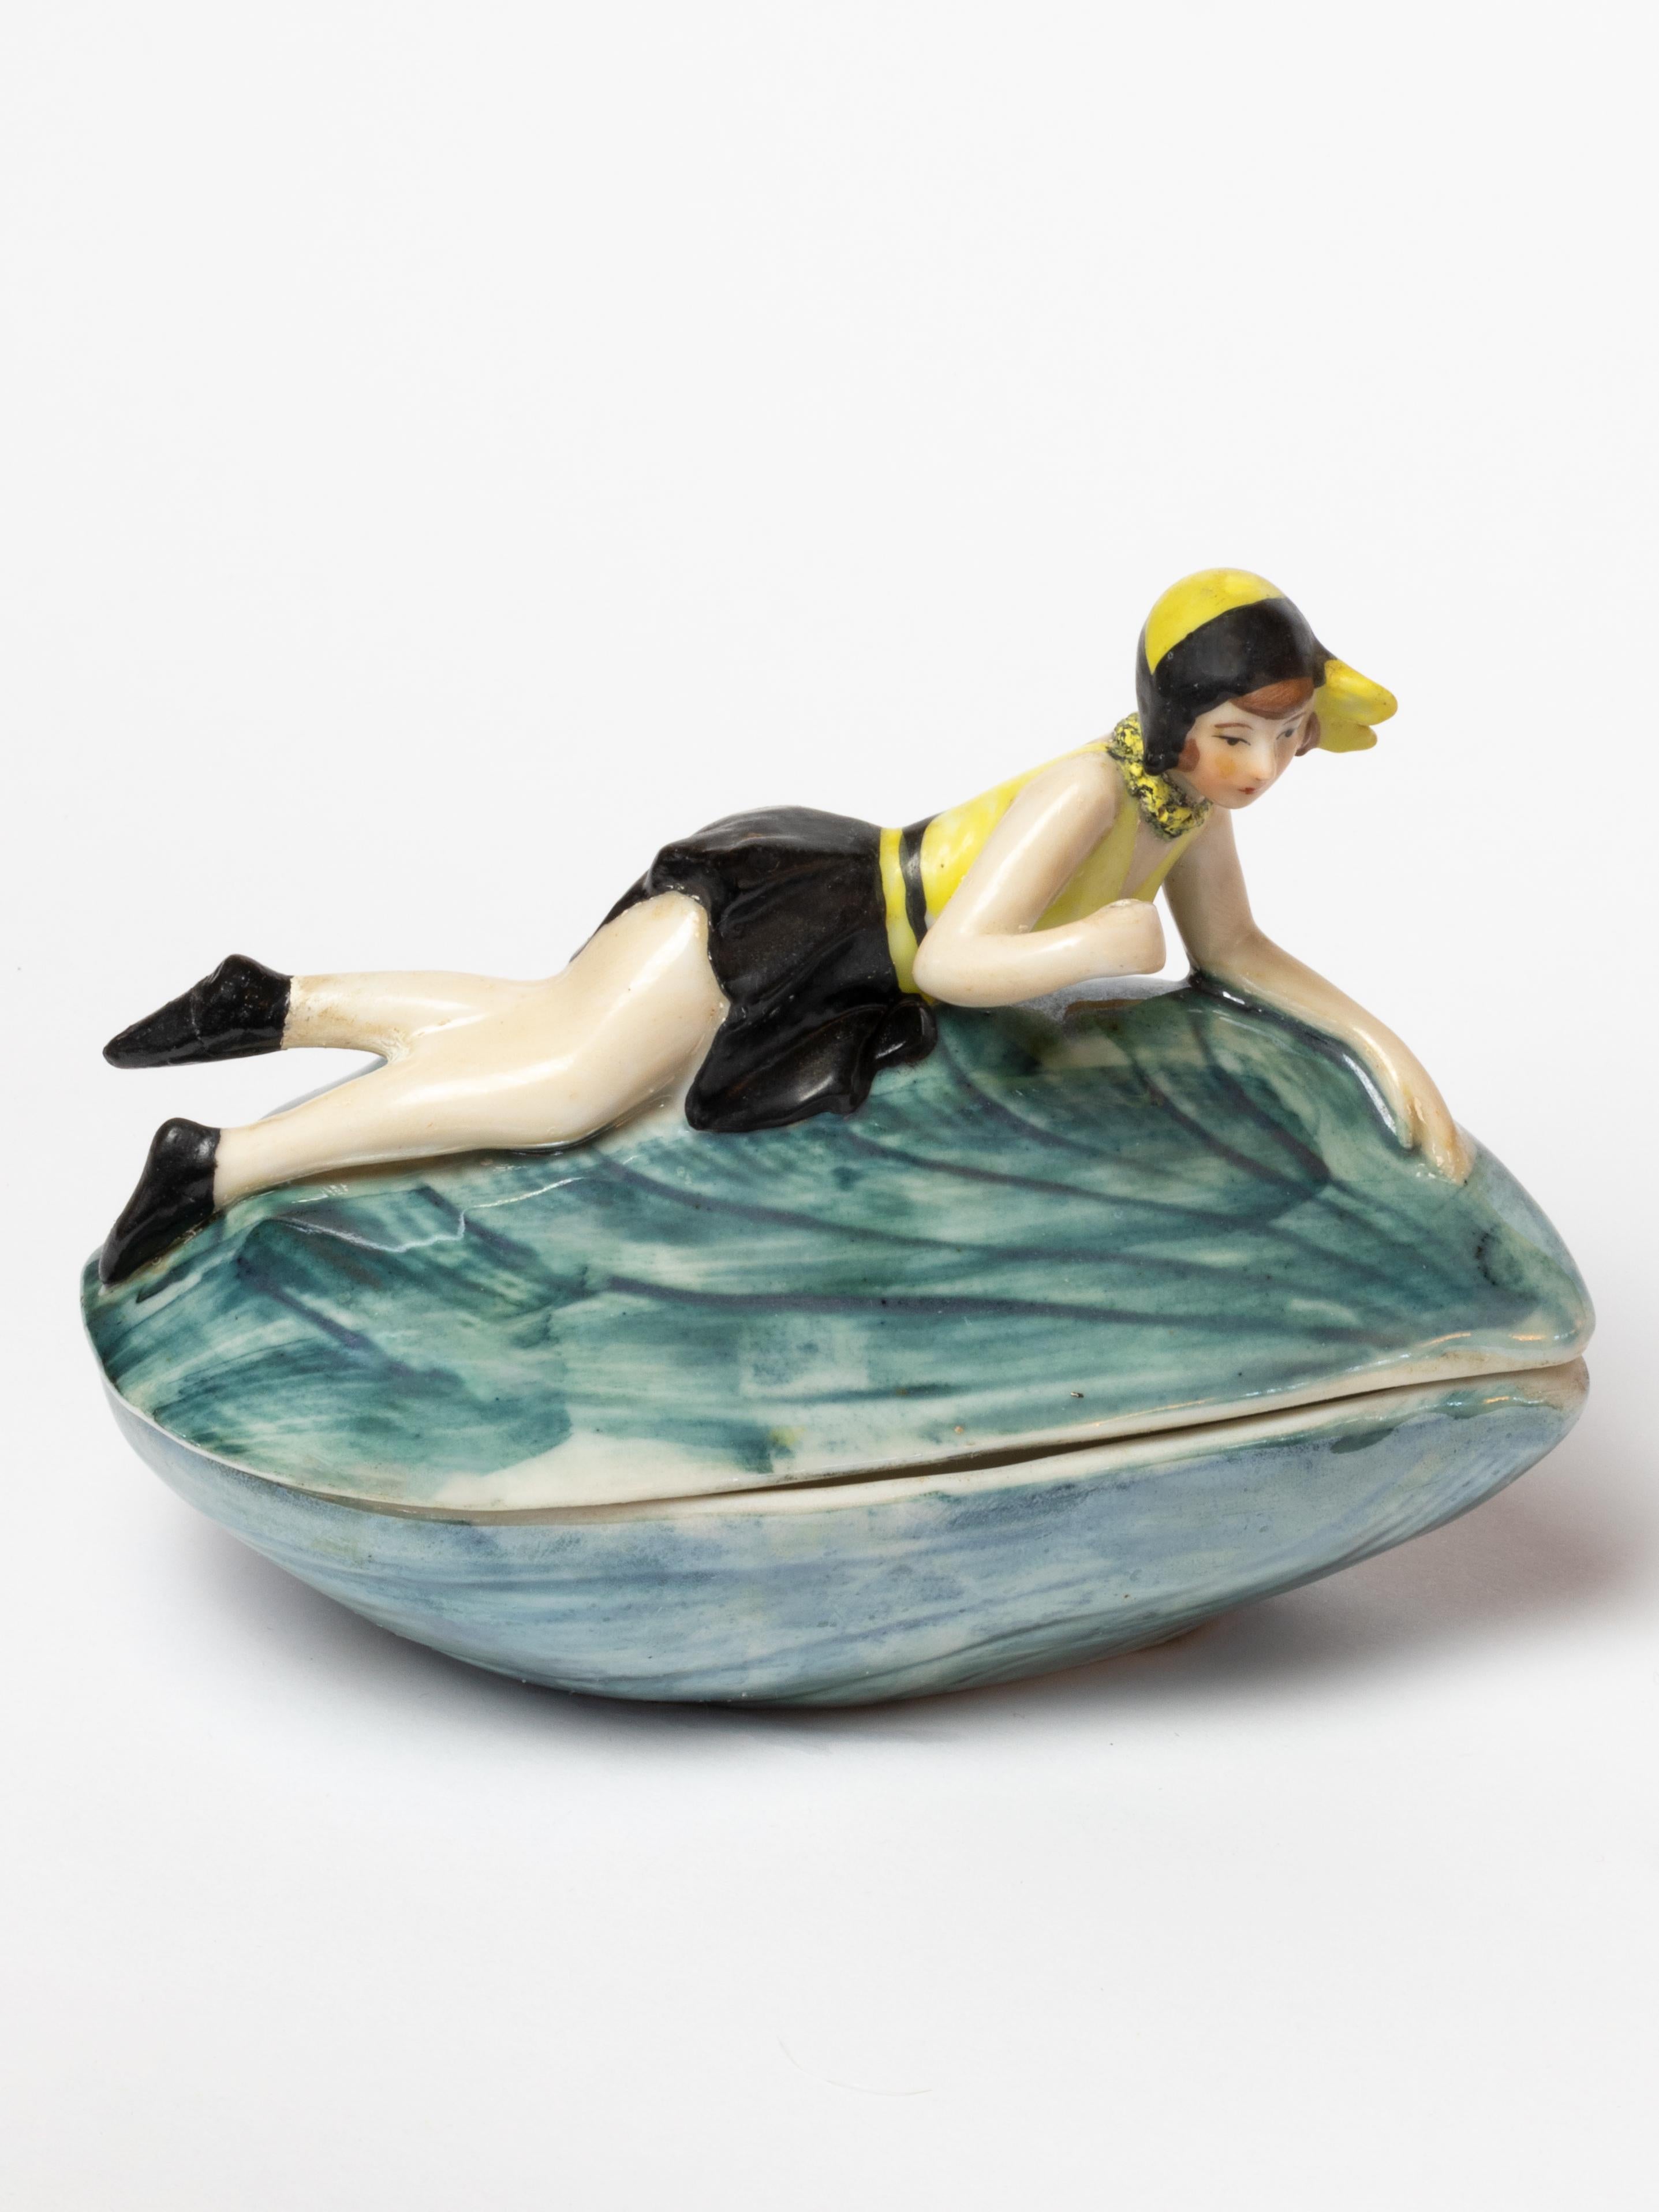 A nacre color Mussel Shell Rice Powder Box figurine in porcelain of a bathing lady in shell / Pin Up girl -style Baigneuse / Petite baigneuse.

10392 marked on the piece.
by W Goebel of Rodental Bavaria
